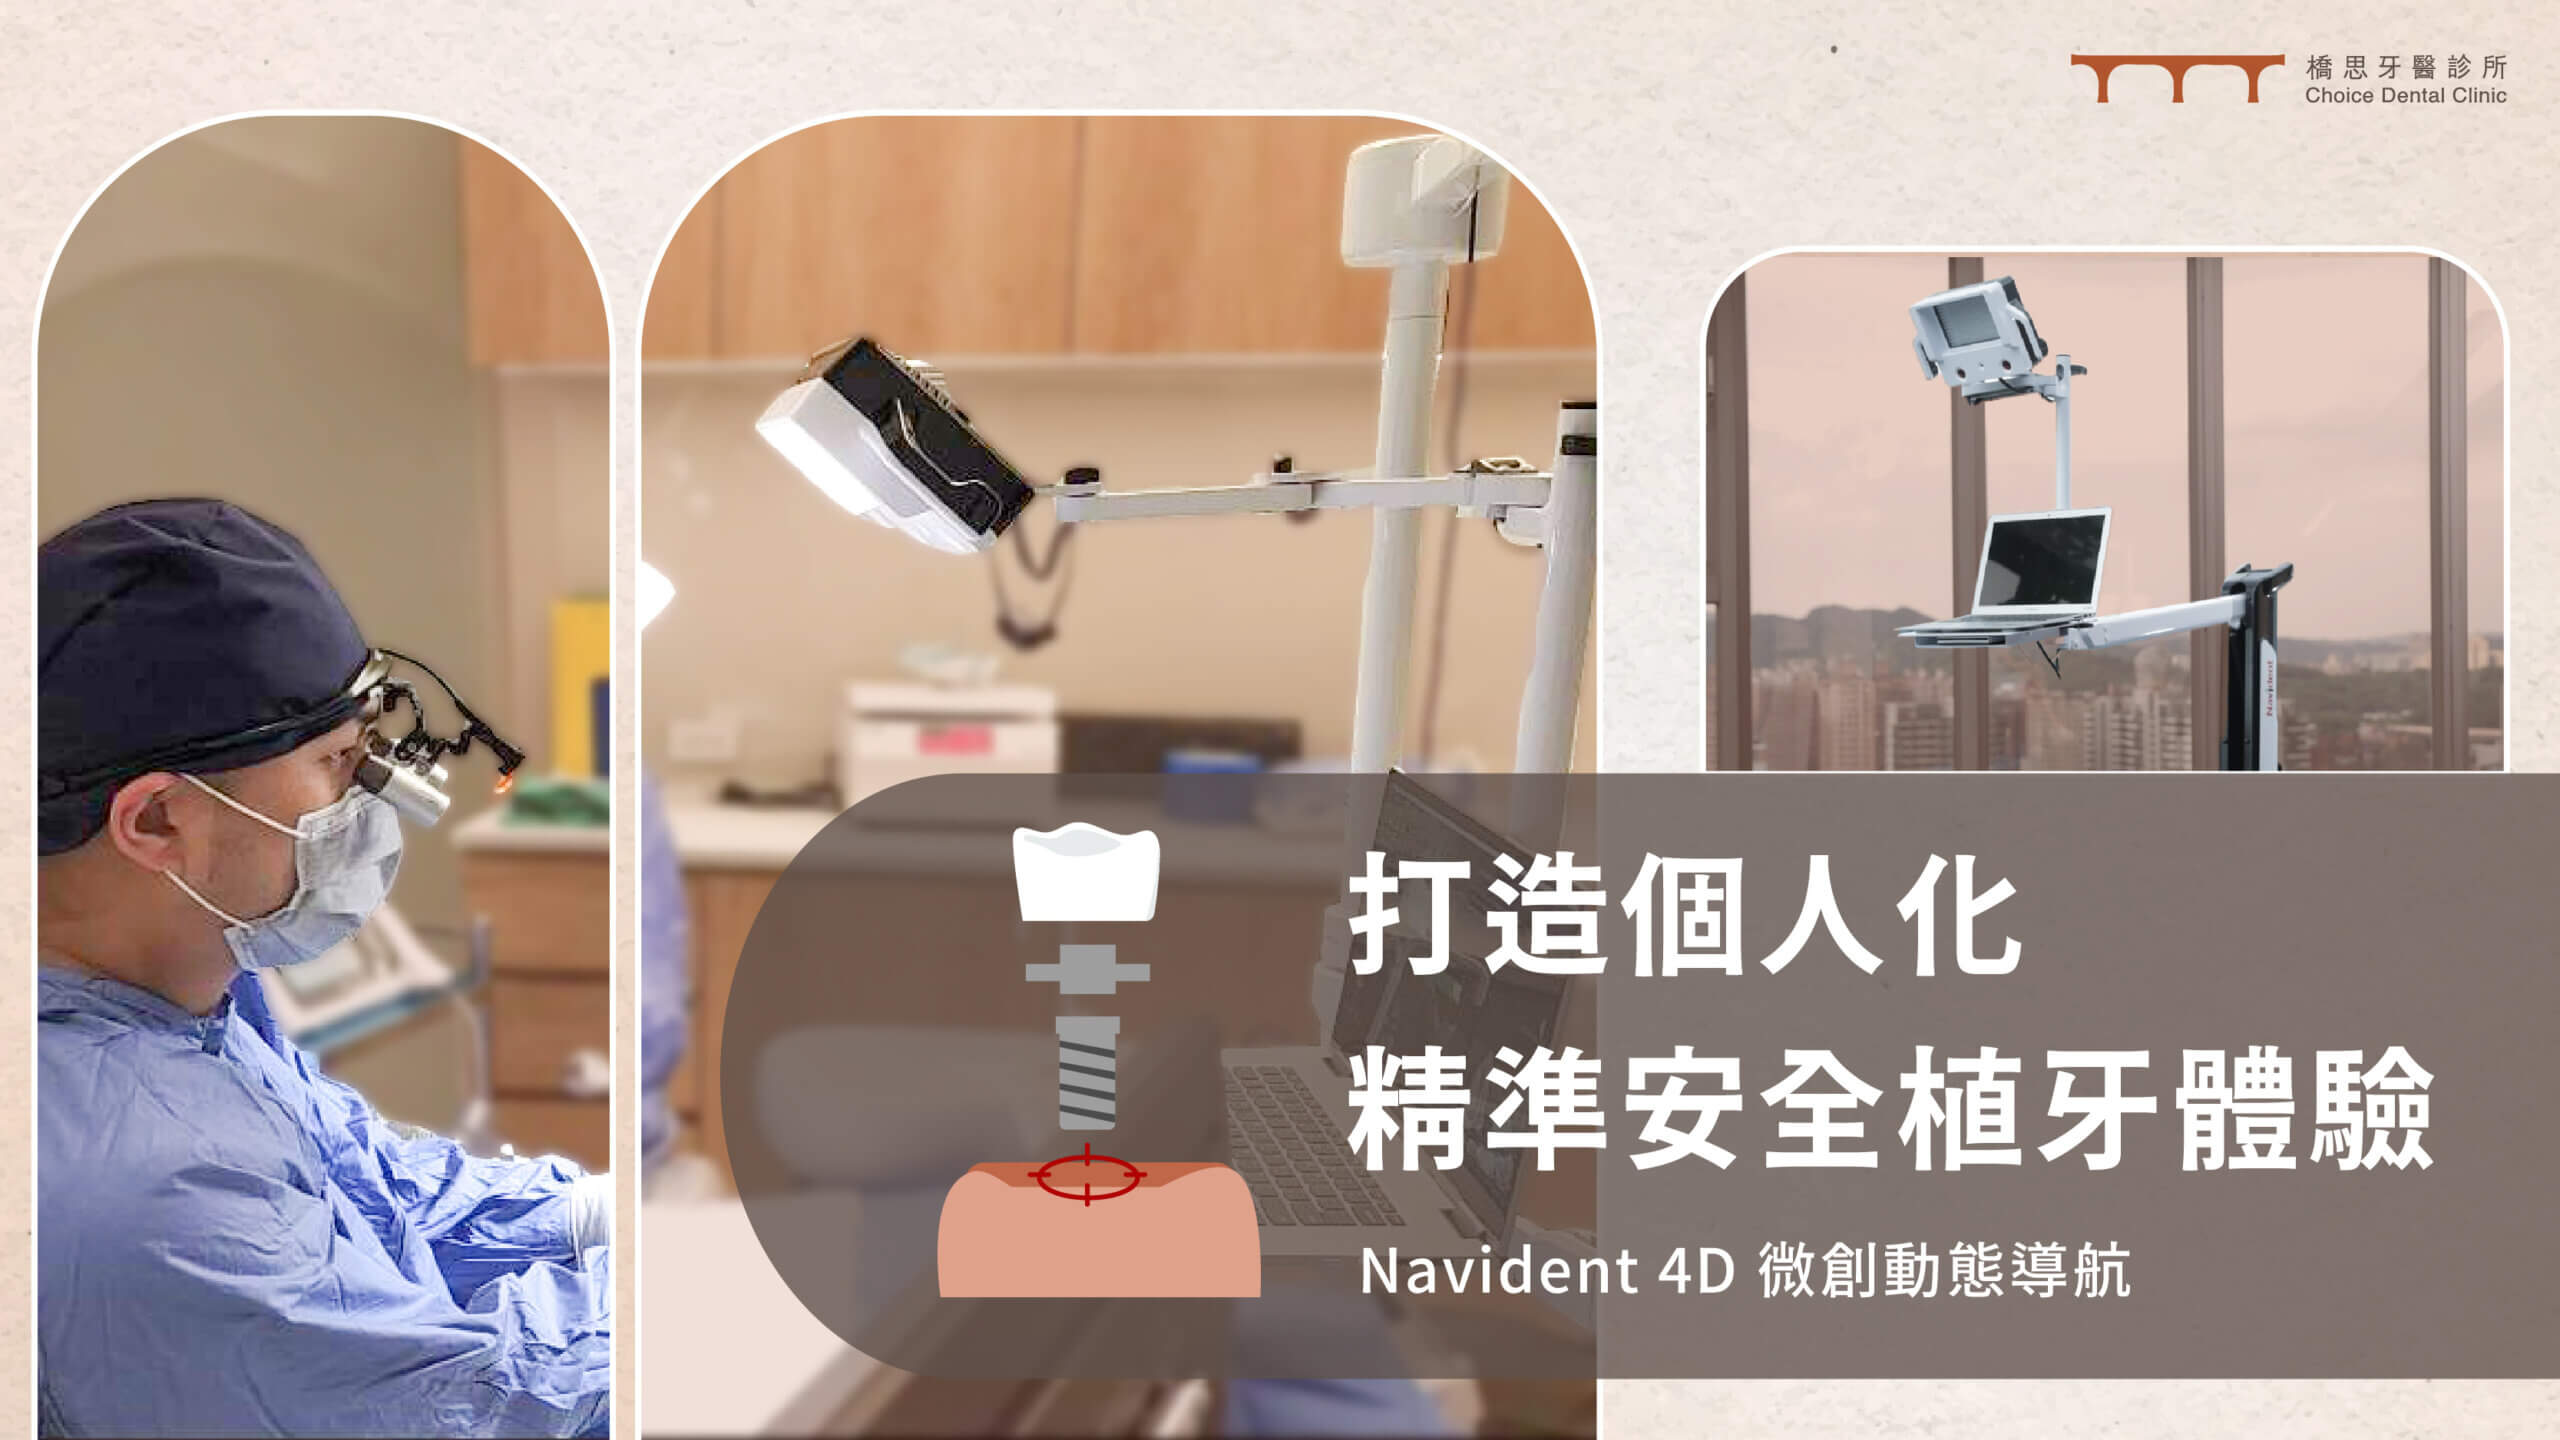 Implant with Navigation System Choice Dental Clinic